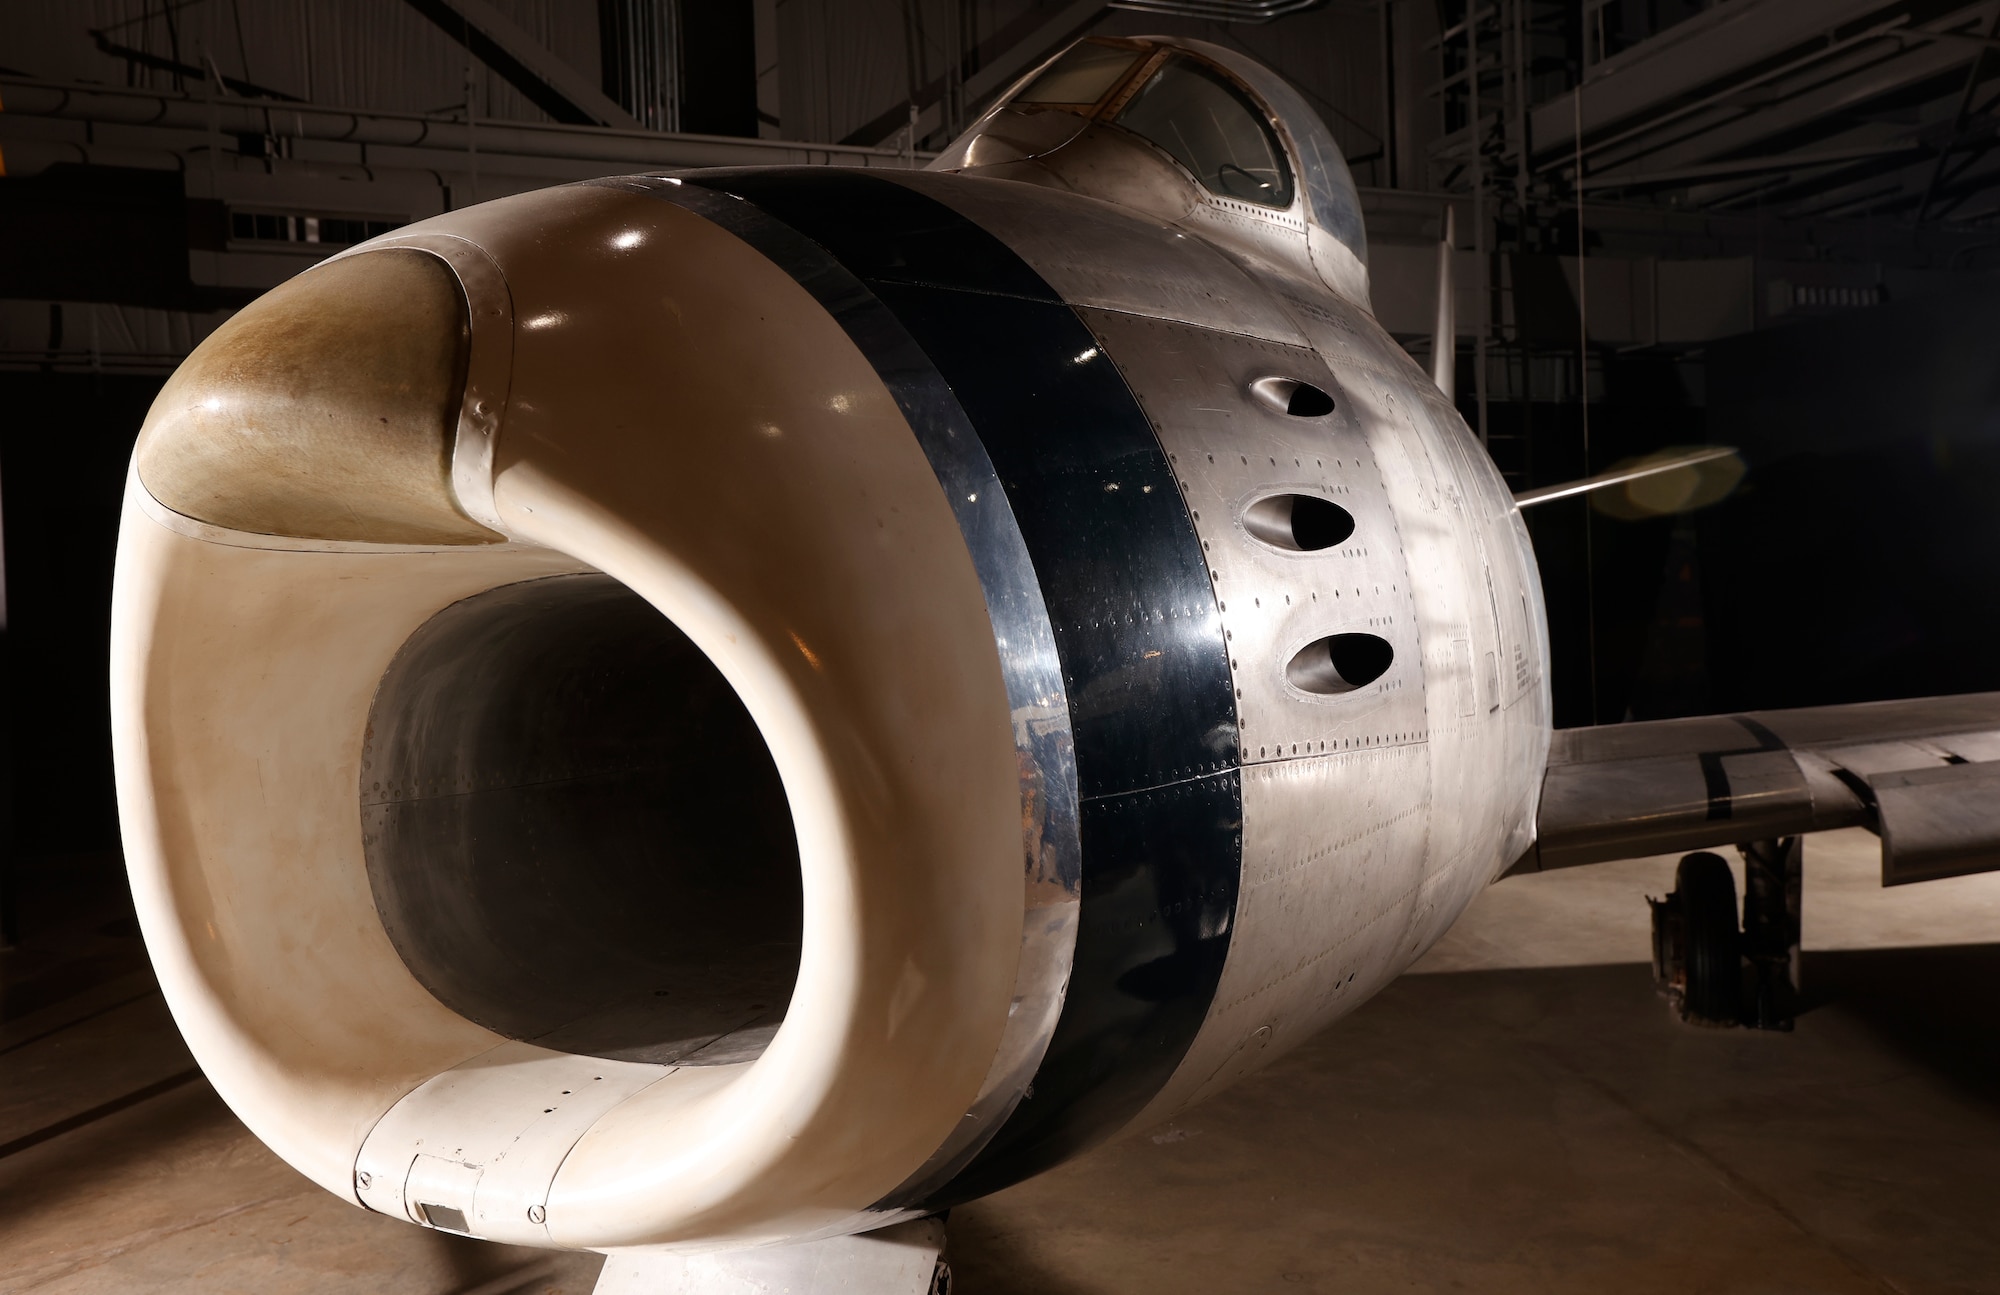 Exterior view of the North American F-86A Sabre